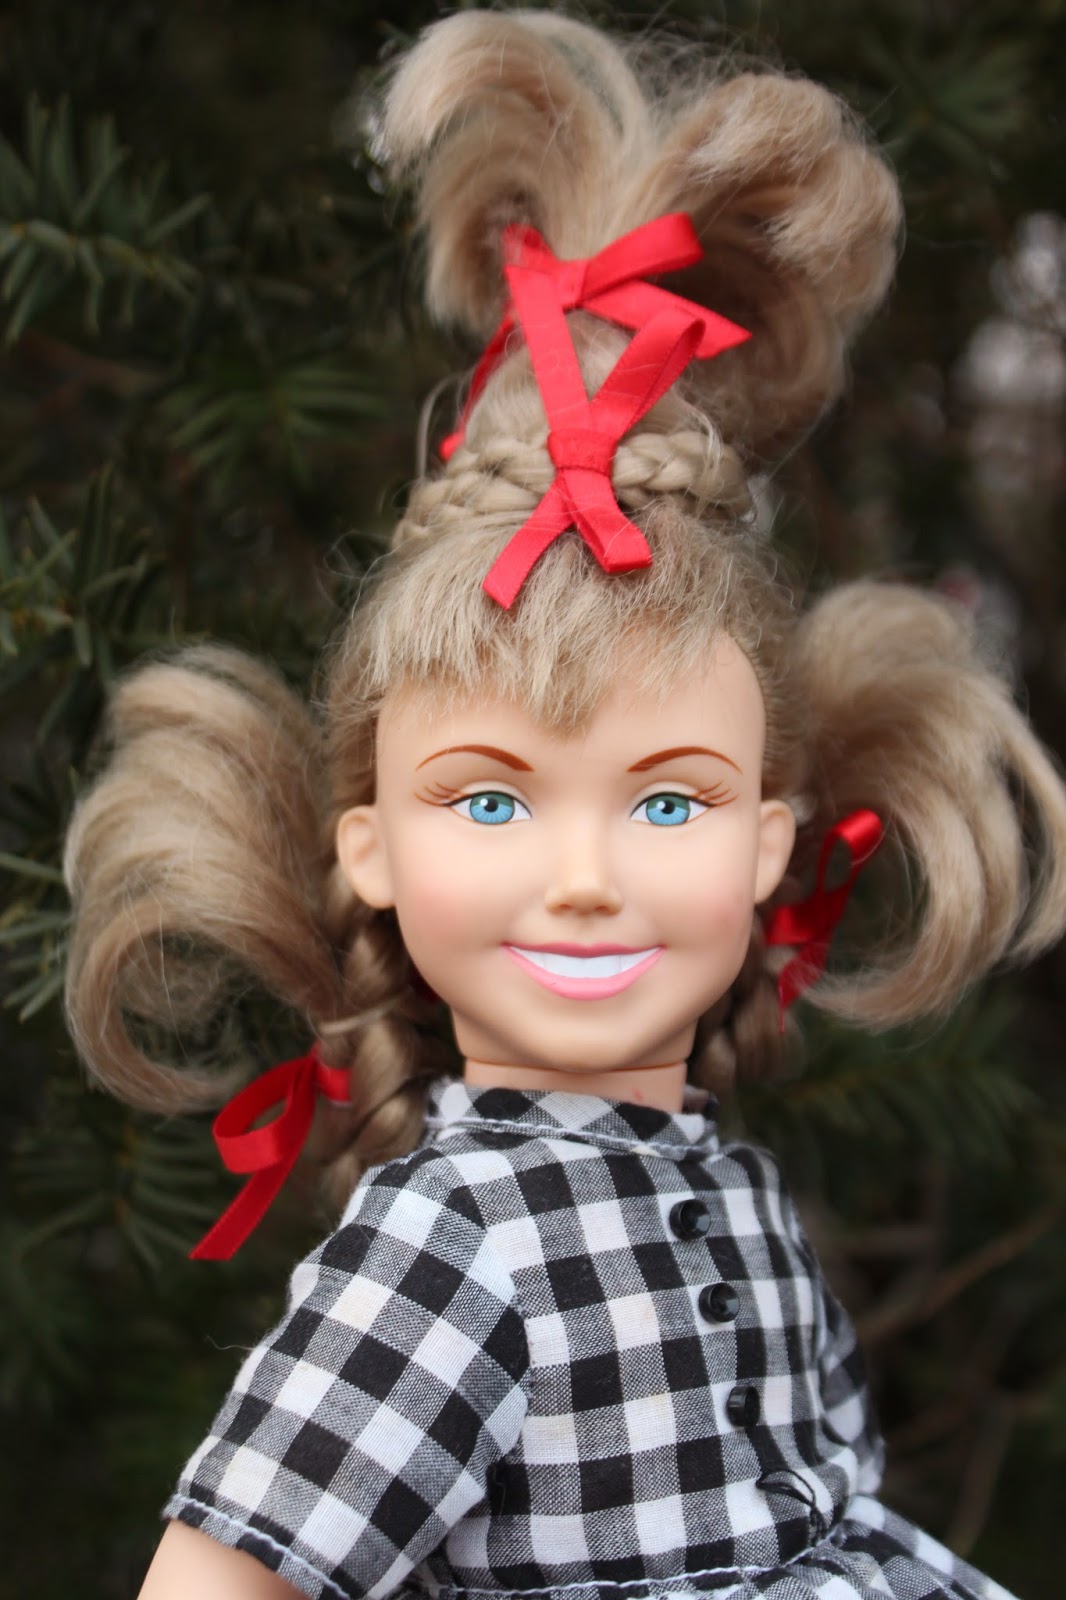 Pictures of cindy lou who